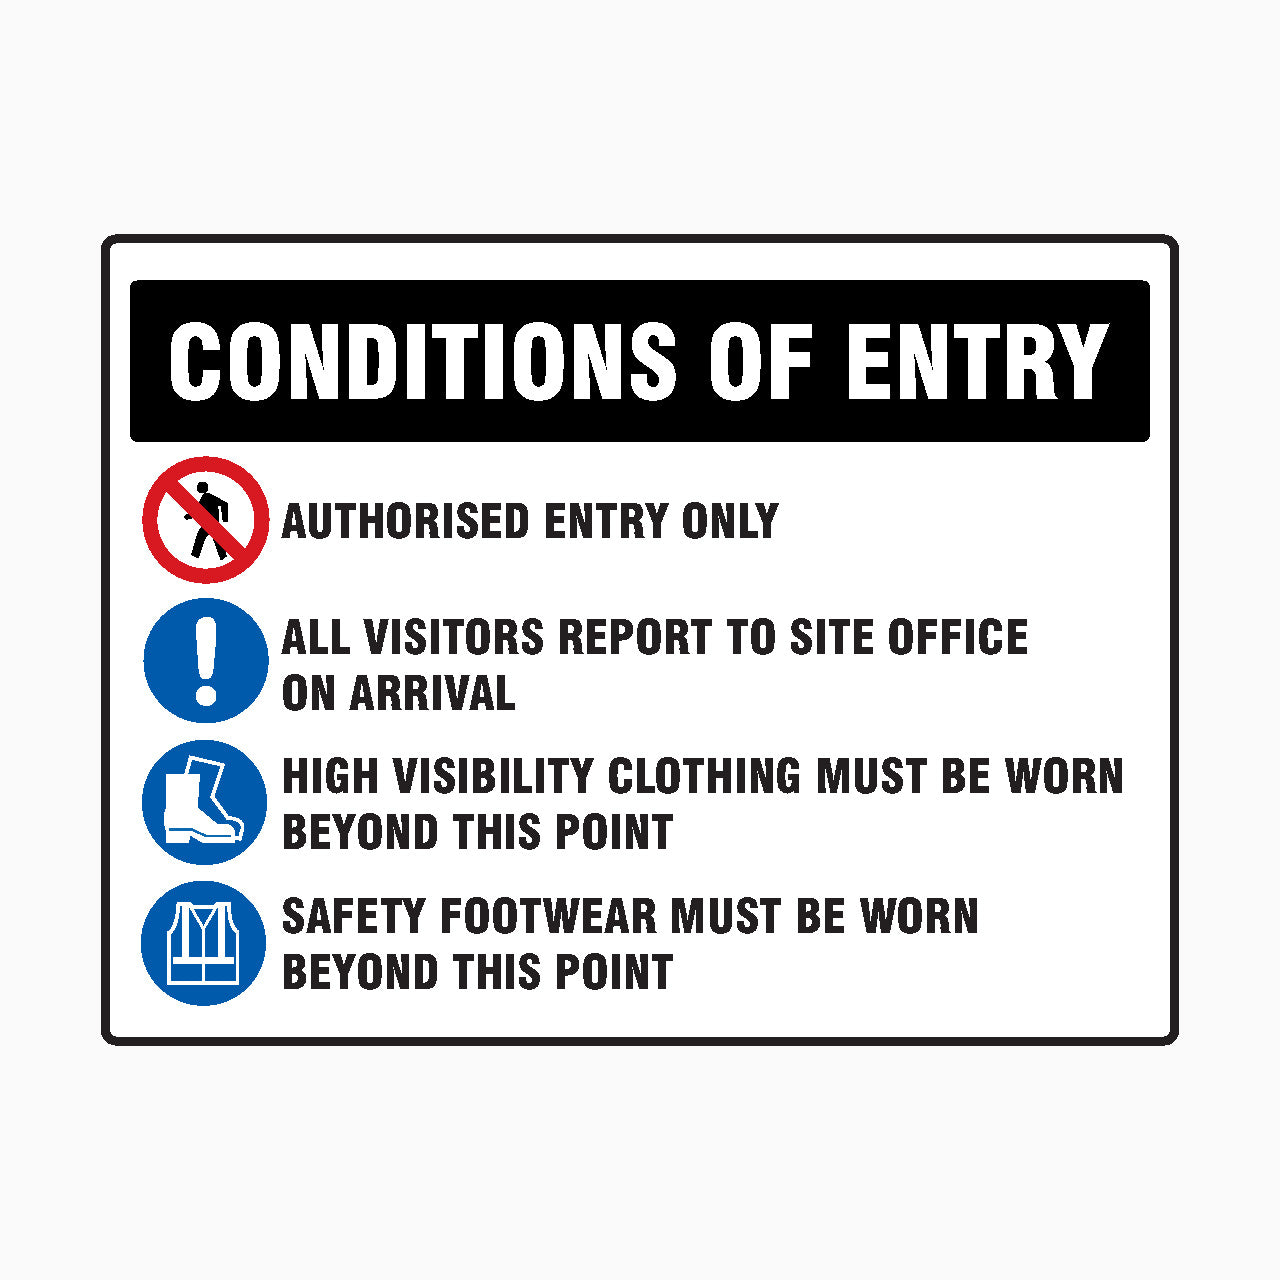 CONDITION OF ENTRY SIGN BUILDING ENTRANCE - AUTHORISED ENTRY ONLY SIGN - ALL VISITORS REPORT TO SITE OFFICE ON ARRIVAL - HIGH VISIBILITY CLOTHING MUST BE WORN BEYOND THIS POINT - SAFETY FOOTWEAR MUST BE WORN BEYOND THIS POINT SIGN